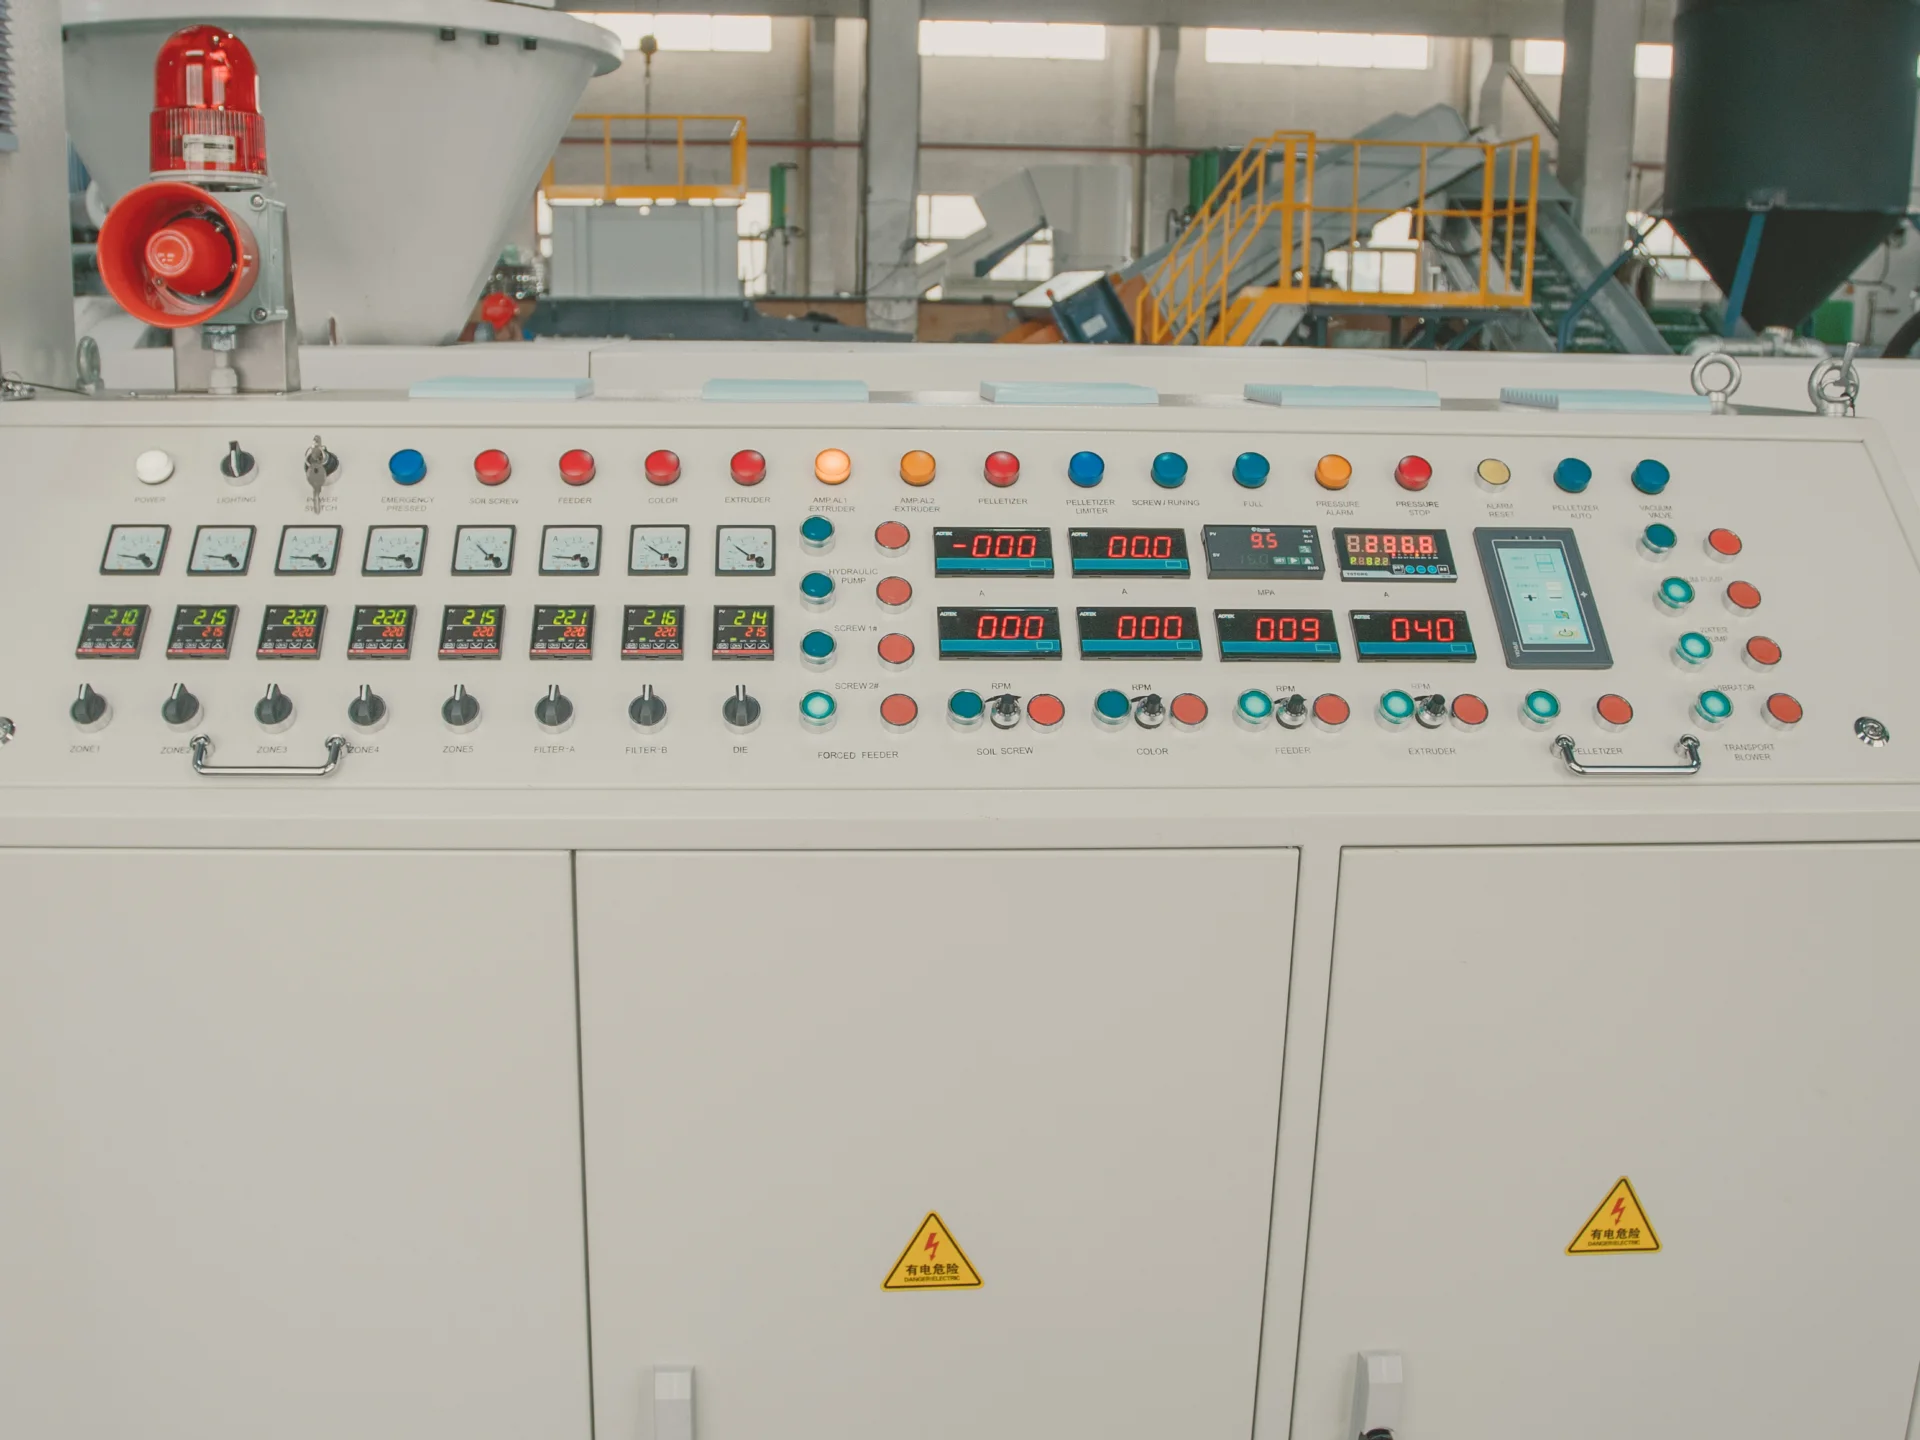 The picture shows an industrial control panel or system console. It has a large array of buttons, indicator lights, digital displays, knobs, and switches that appear to be used for operating and monitoring some kind of machinery or manufacturing process. The control panel has various colored buttons (red, blue, orange, yellow) likely representing different functions or commands. There are numeric digital readouts displaying values like temperatures or measurements. The overall setup suggests this is the user interface for controlling complex industrial equipment or an automated production line.